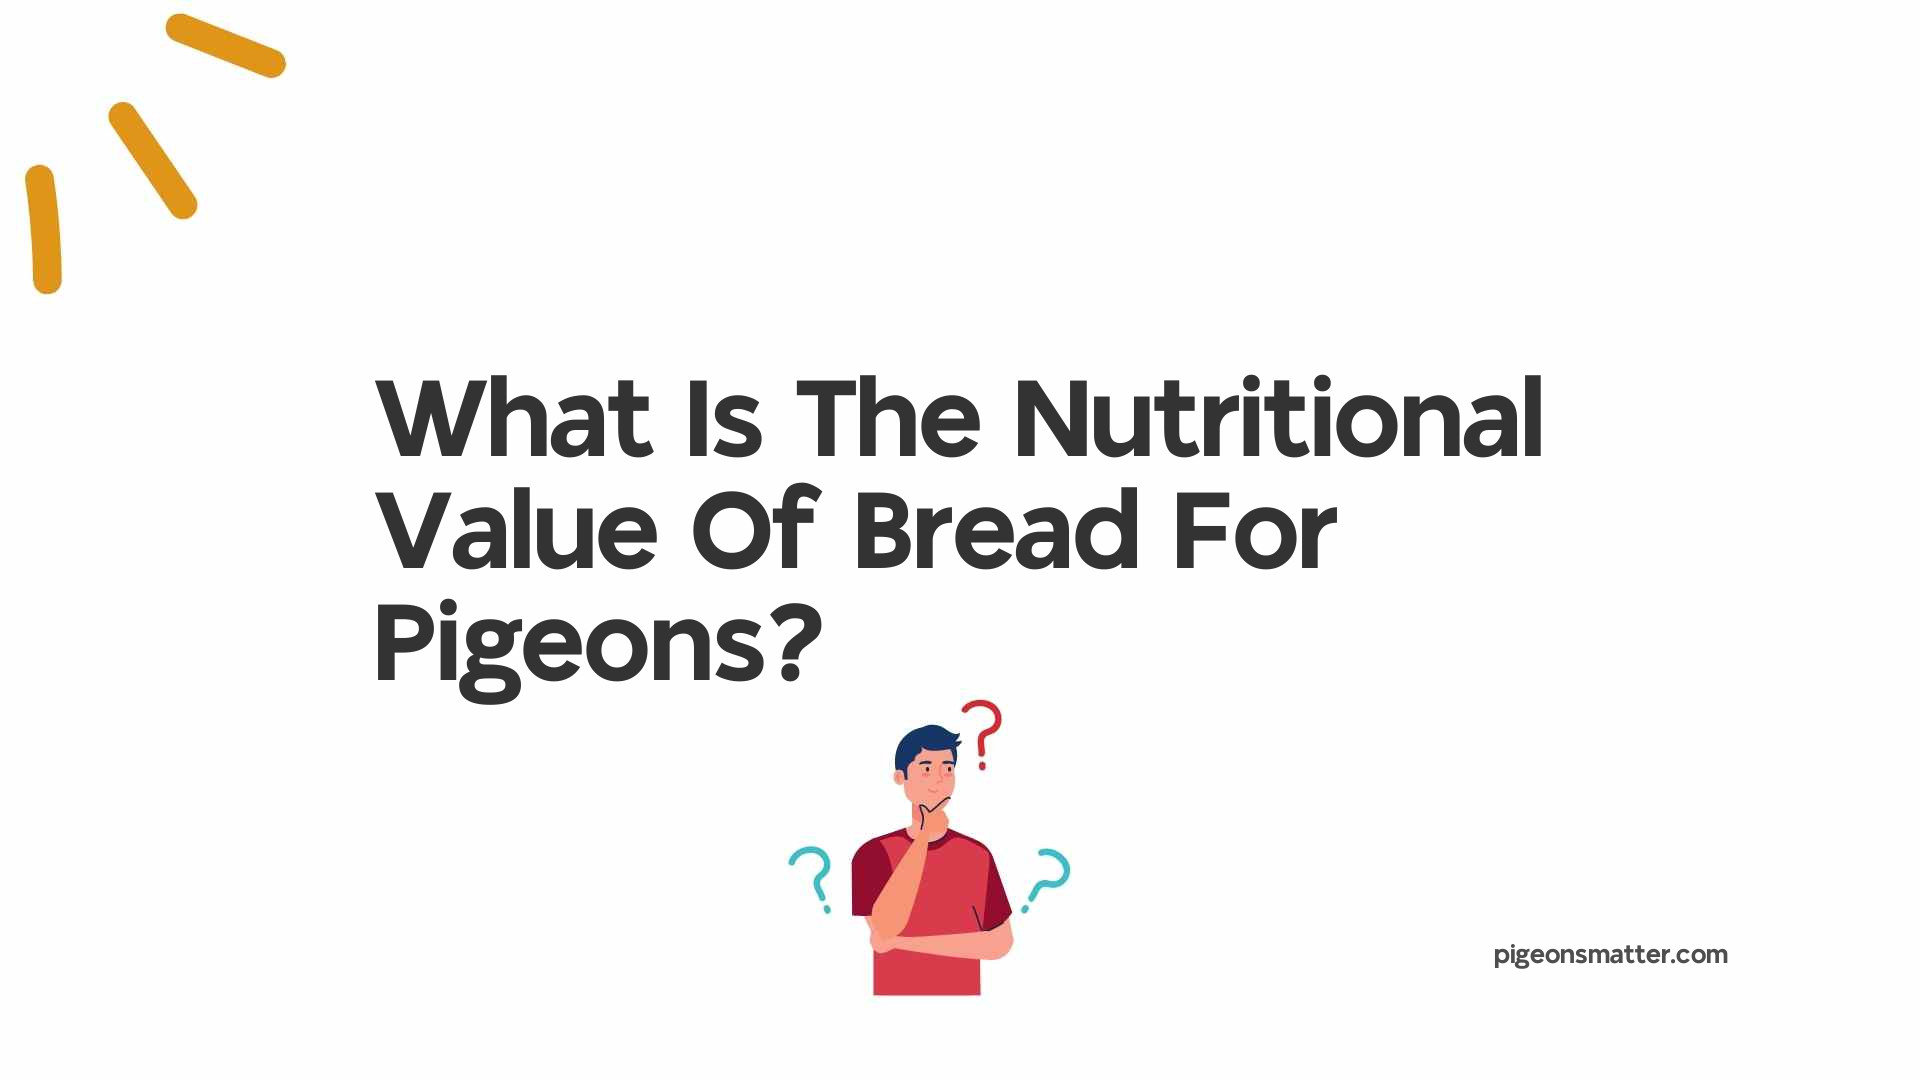 What Is The Nutritional Value Of Bread For Pigeons?